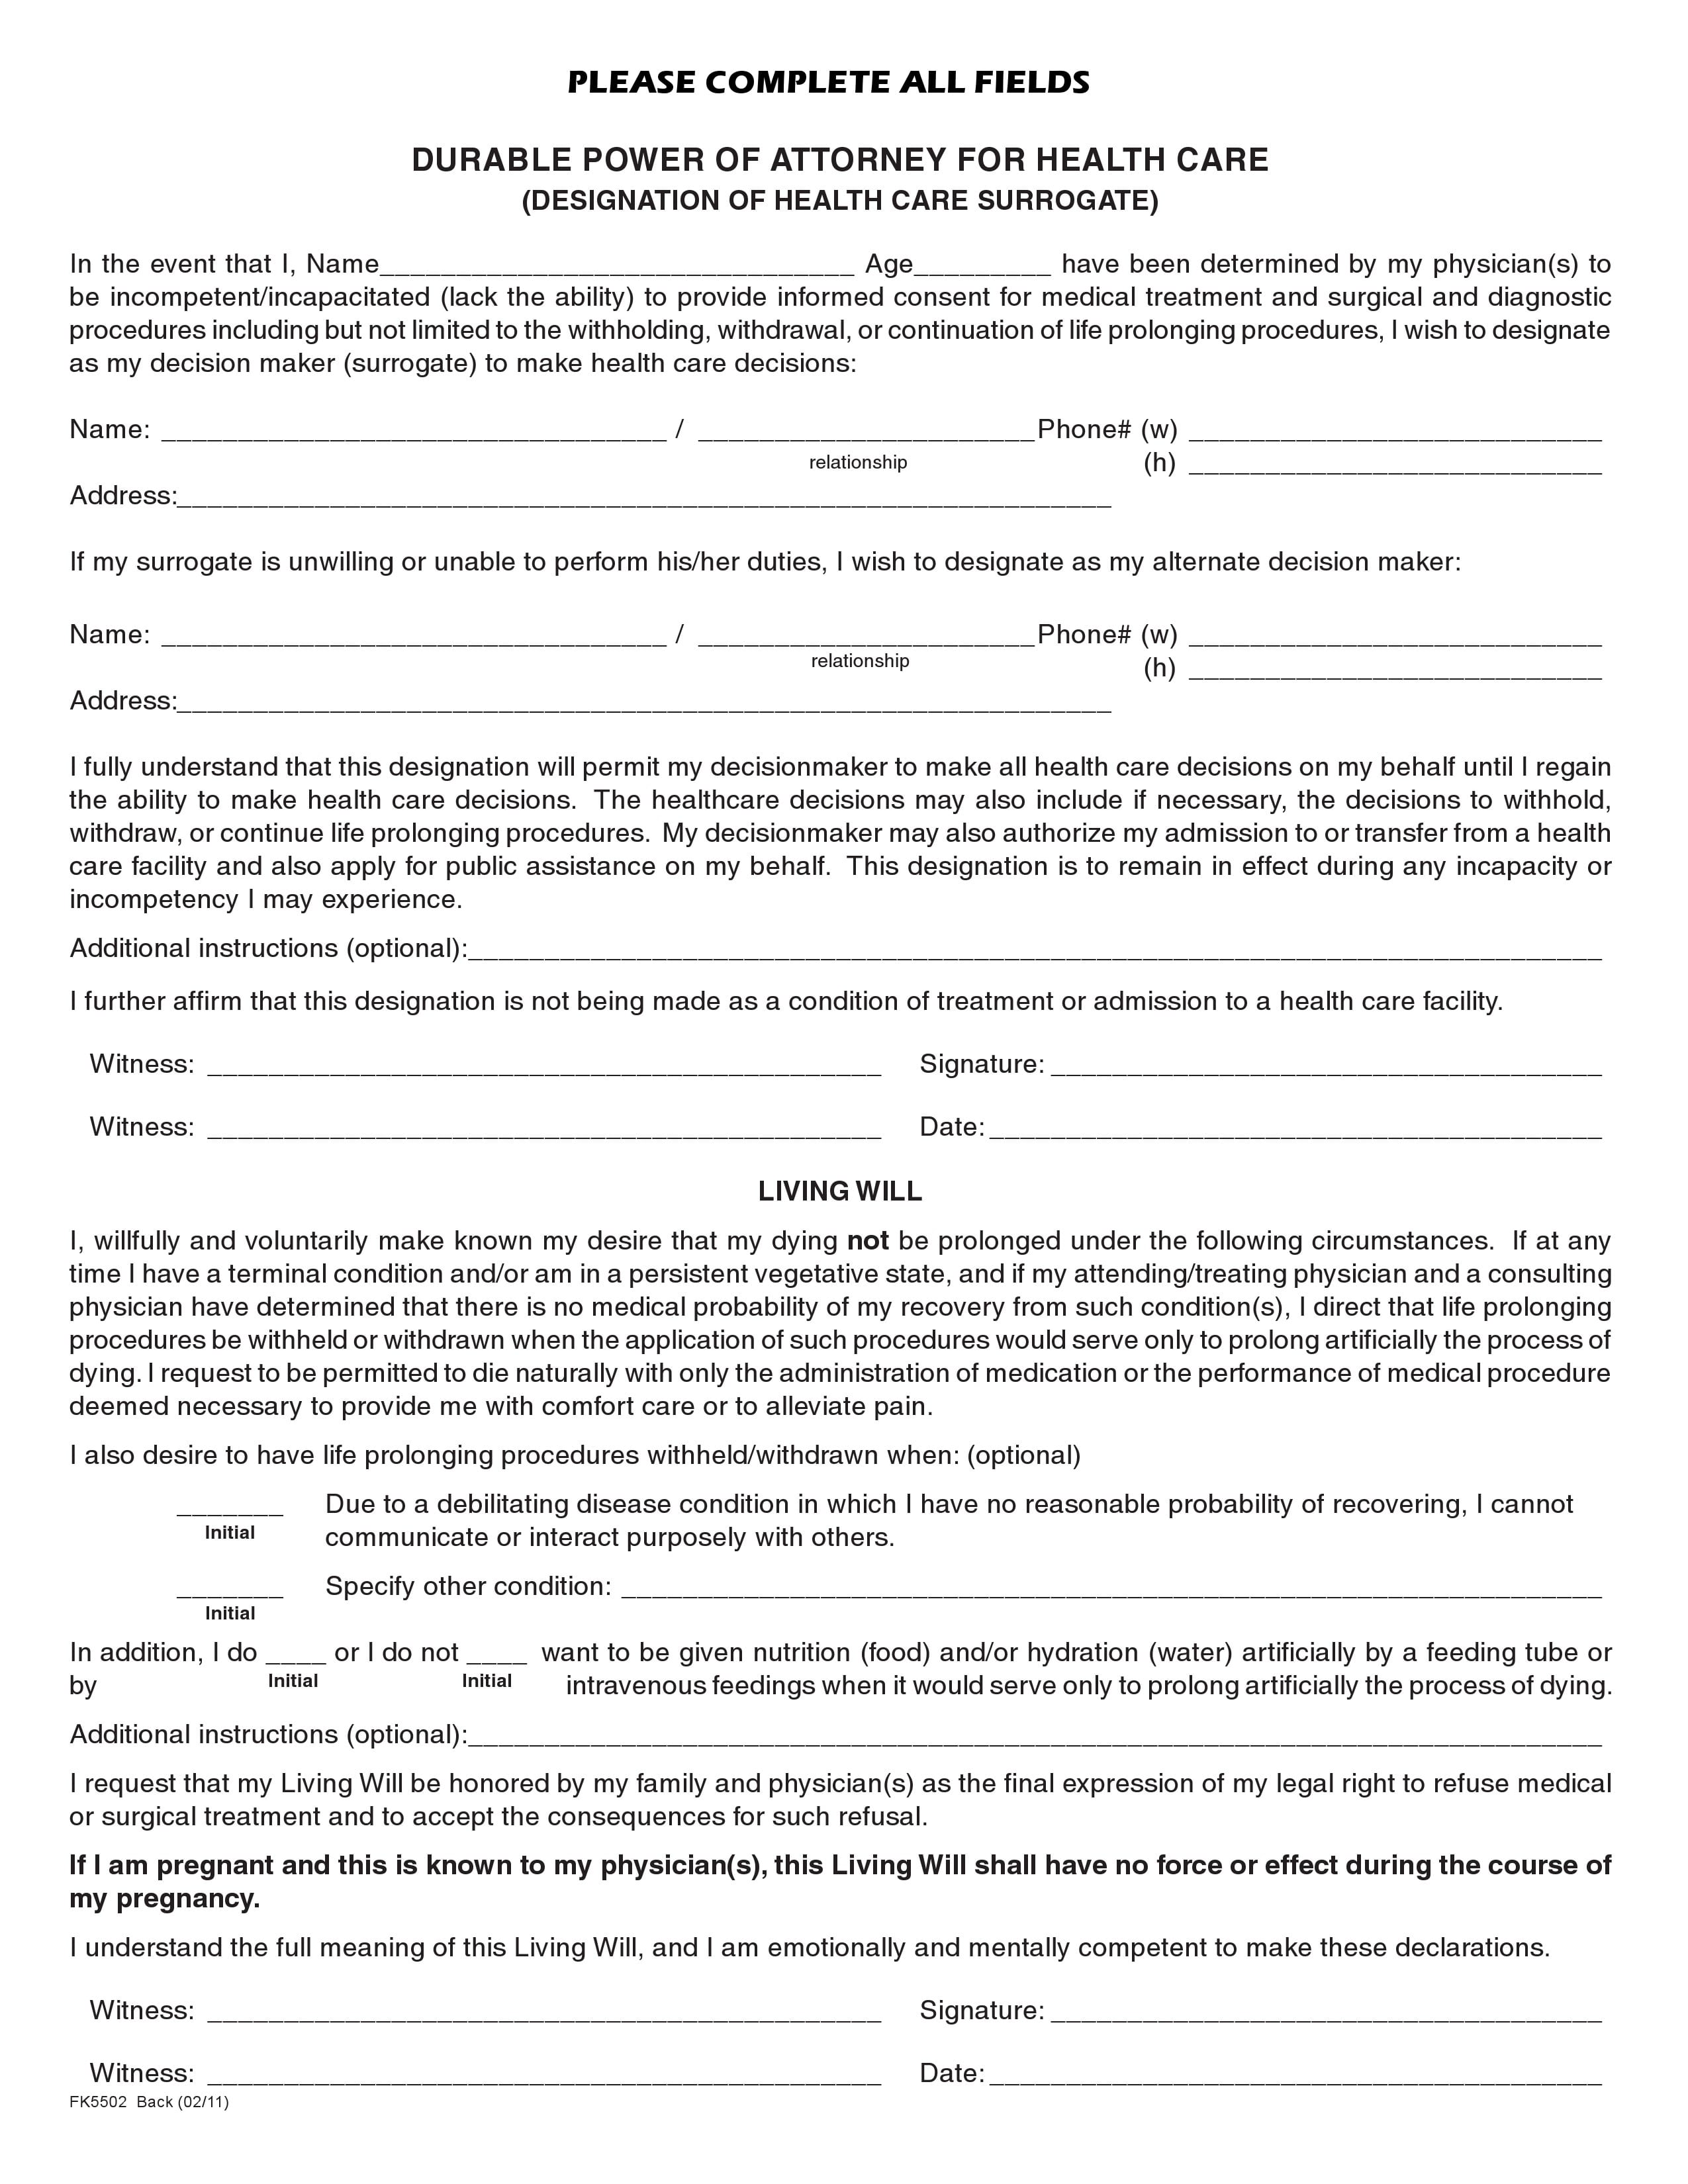 Free Florida Durable Power of Attorney for Health Care Form (Living